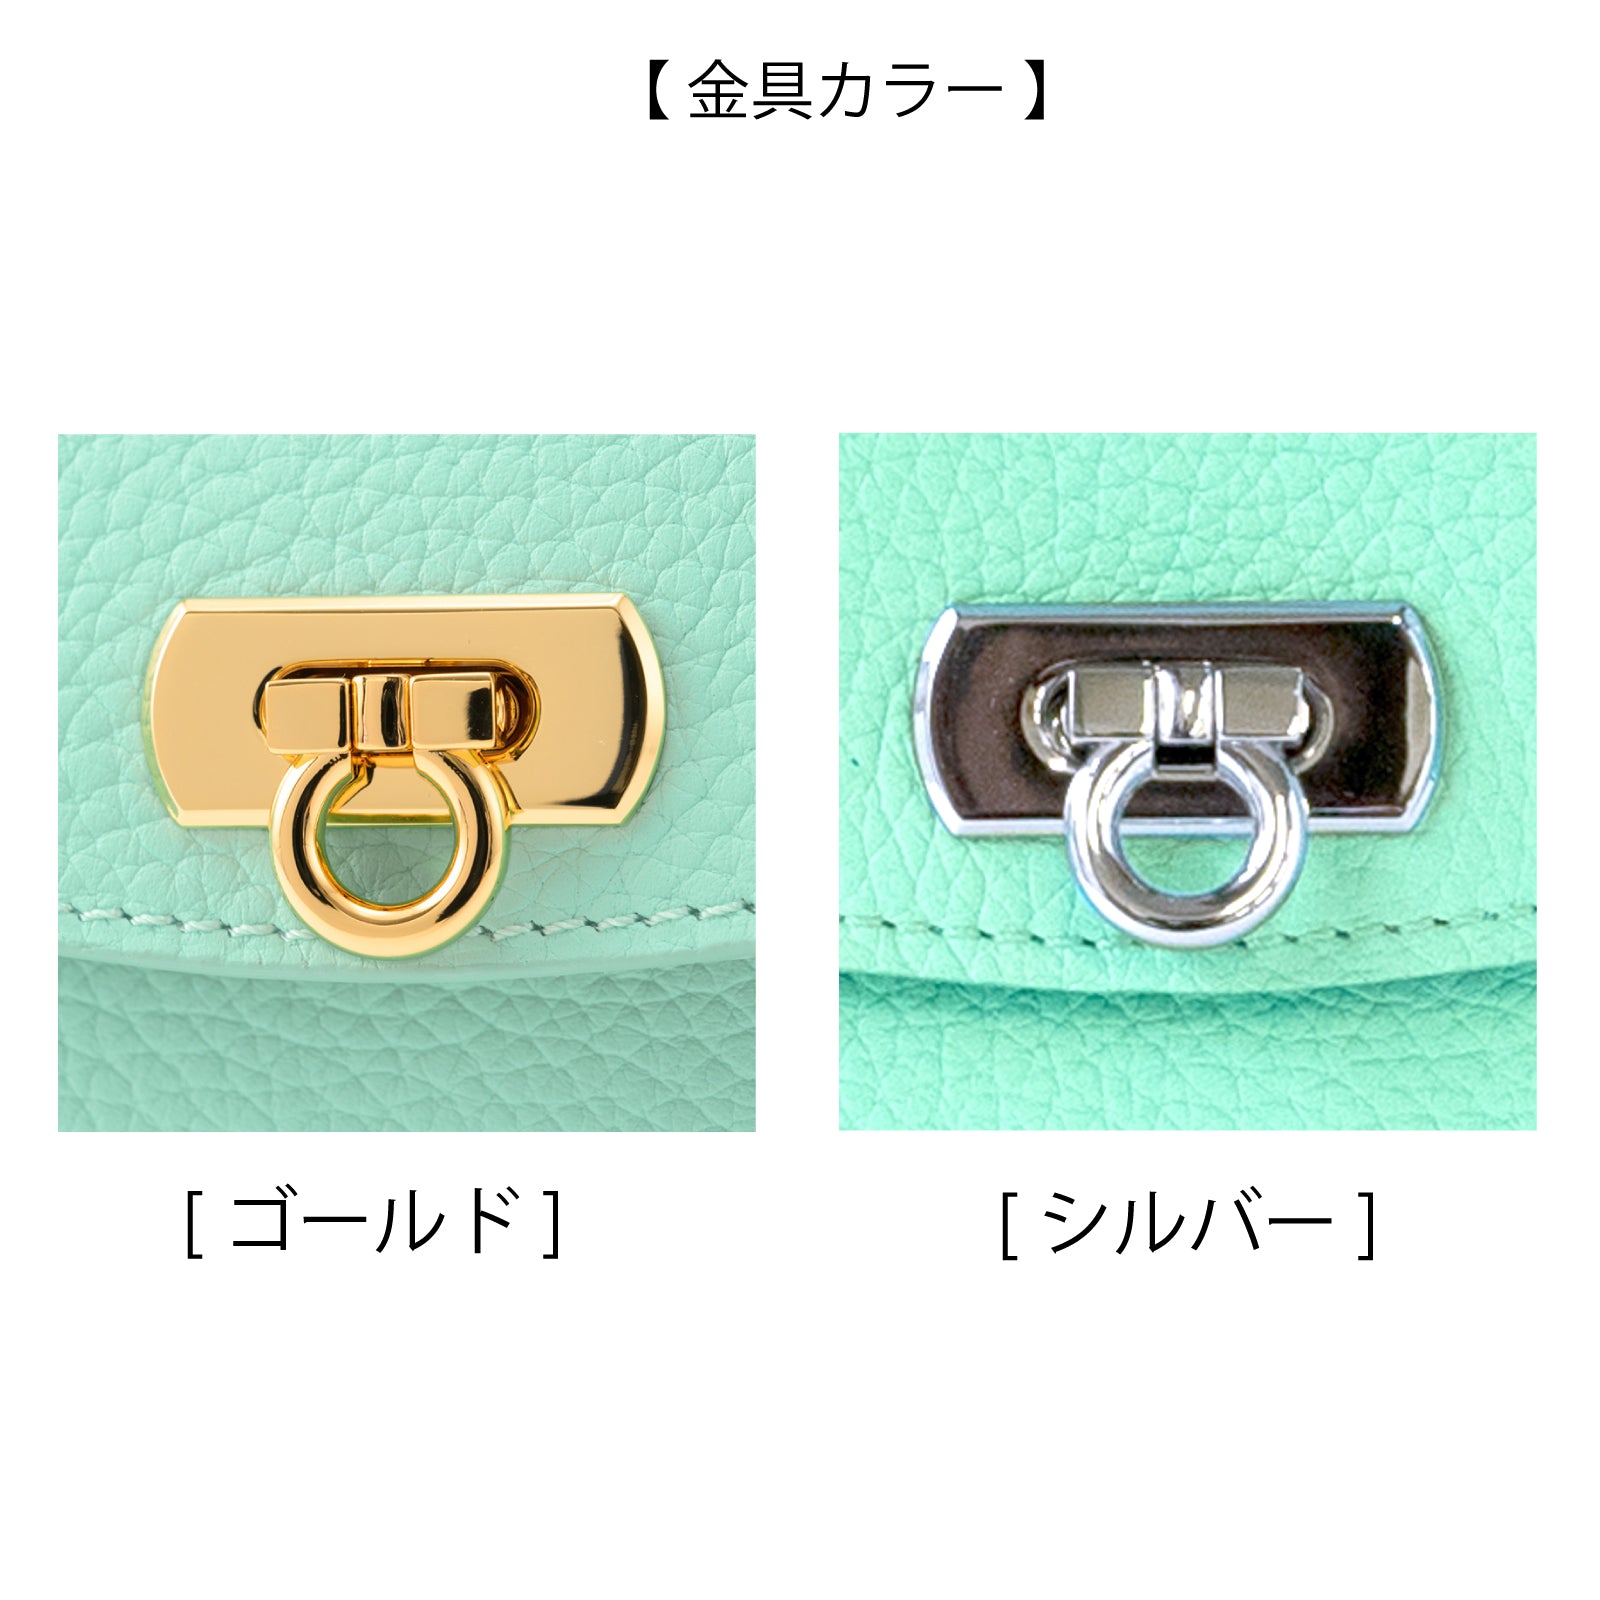 [Tiffany Blue / Back color order] 2WAY Boston Loire 22 Taurillon Clemence